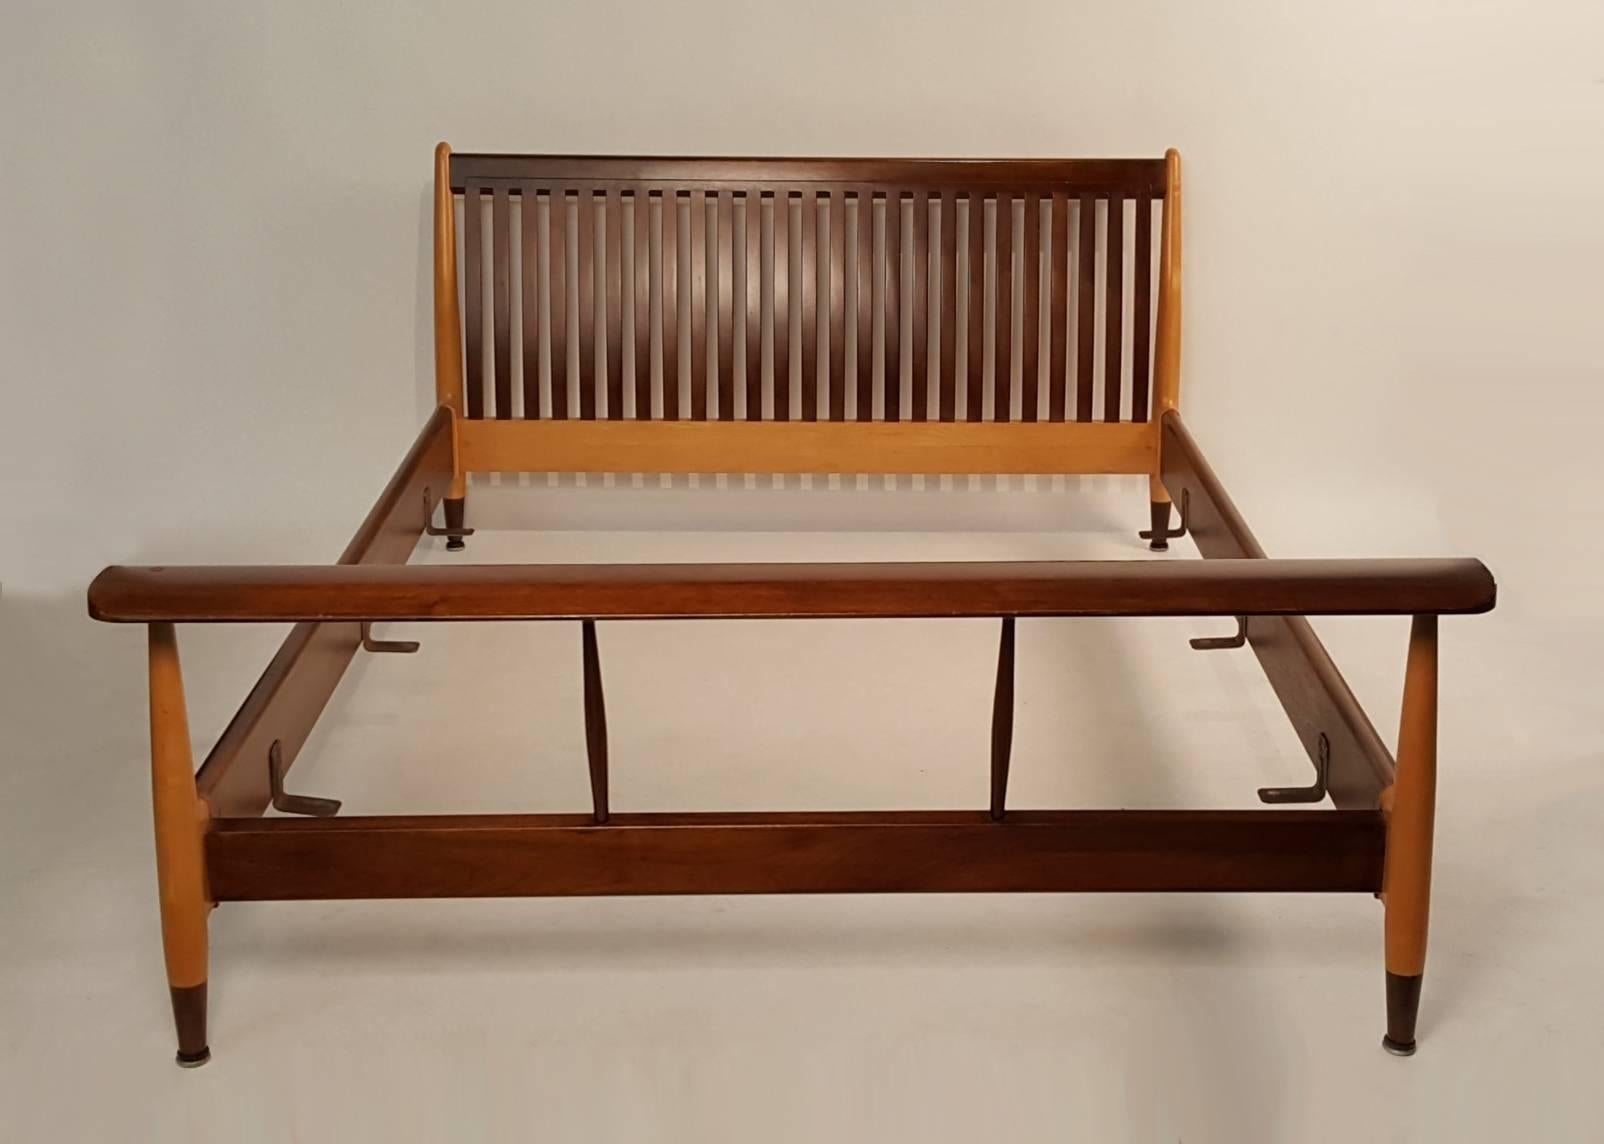 Rare Finn Juhl designed double bed frame in solid maple and walnut. Produced in the early 1950s by Baker furniture. Will accommodate a 54 x 74